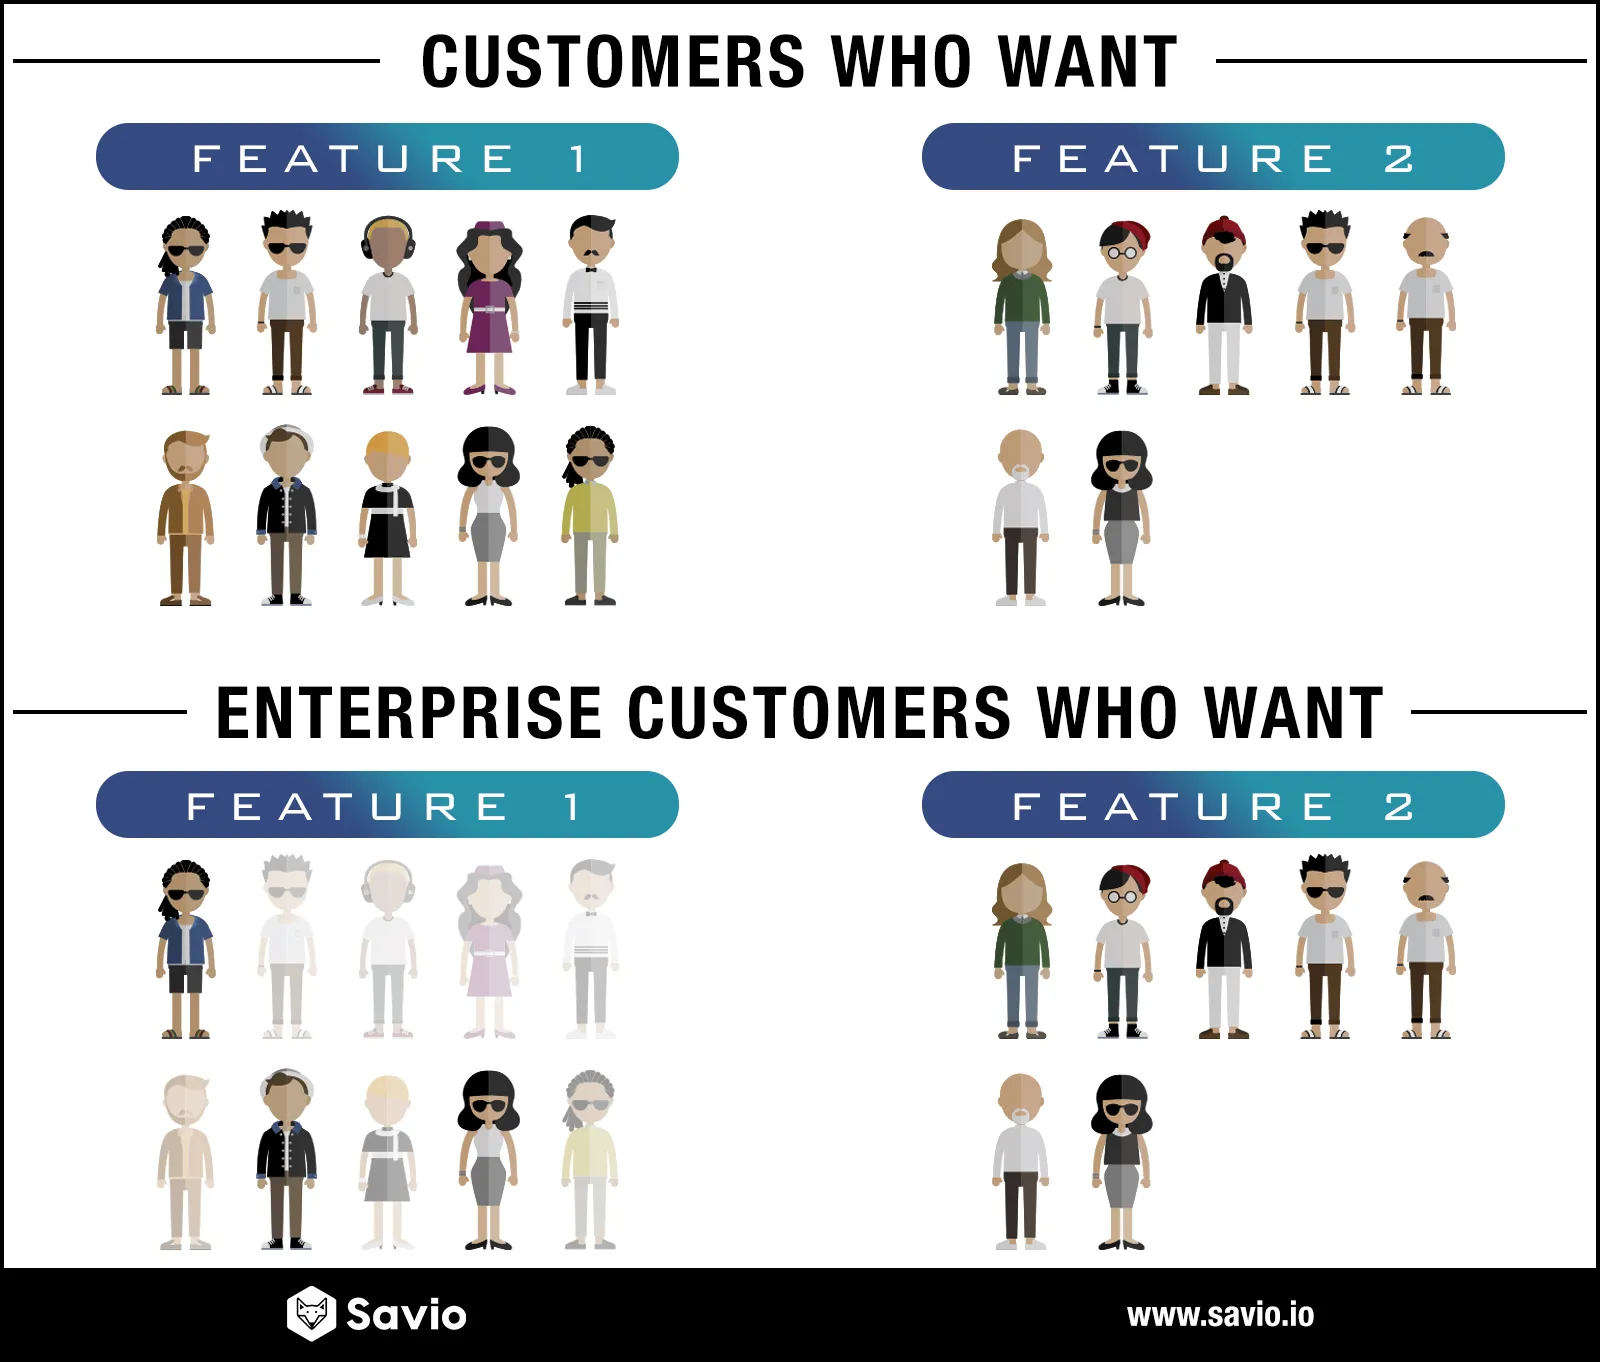 Segmenting customers helps you see what your most valuable customers want